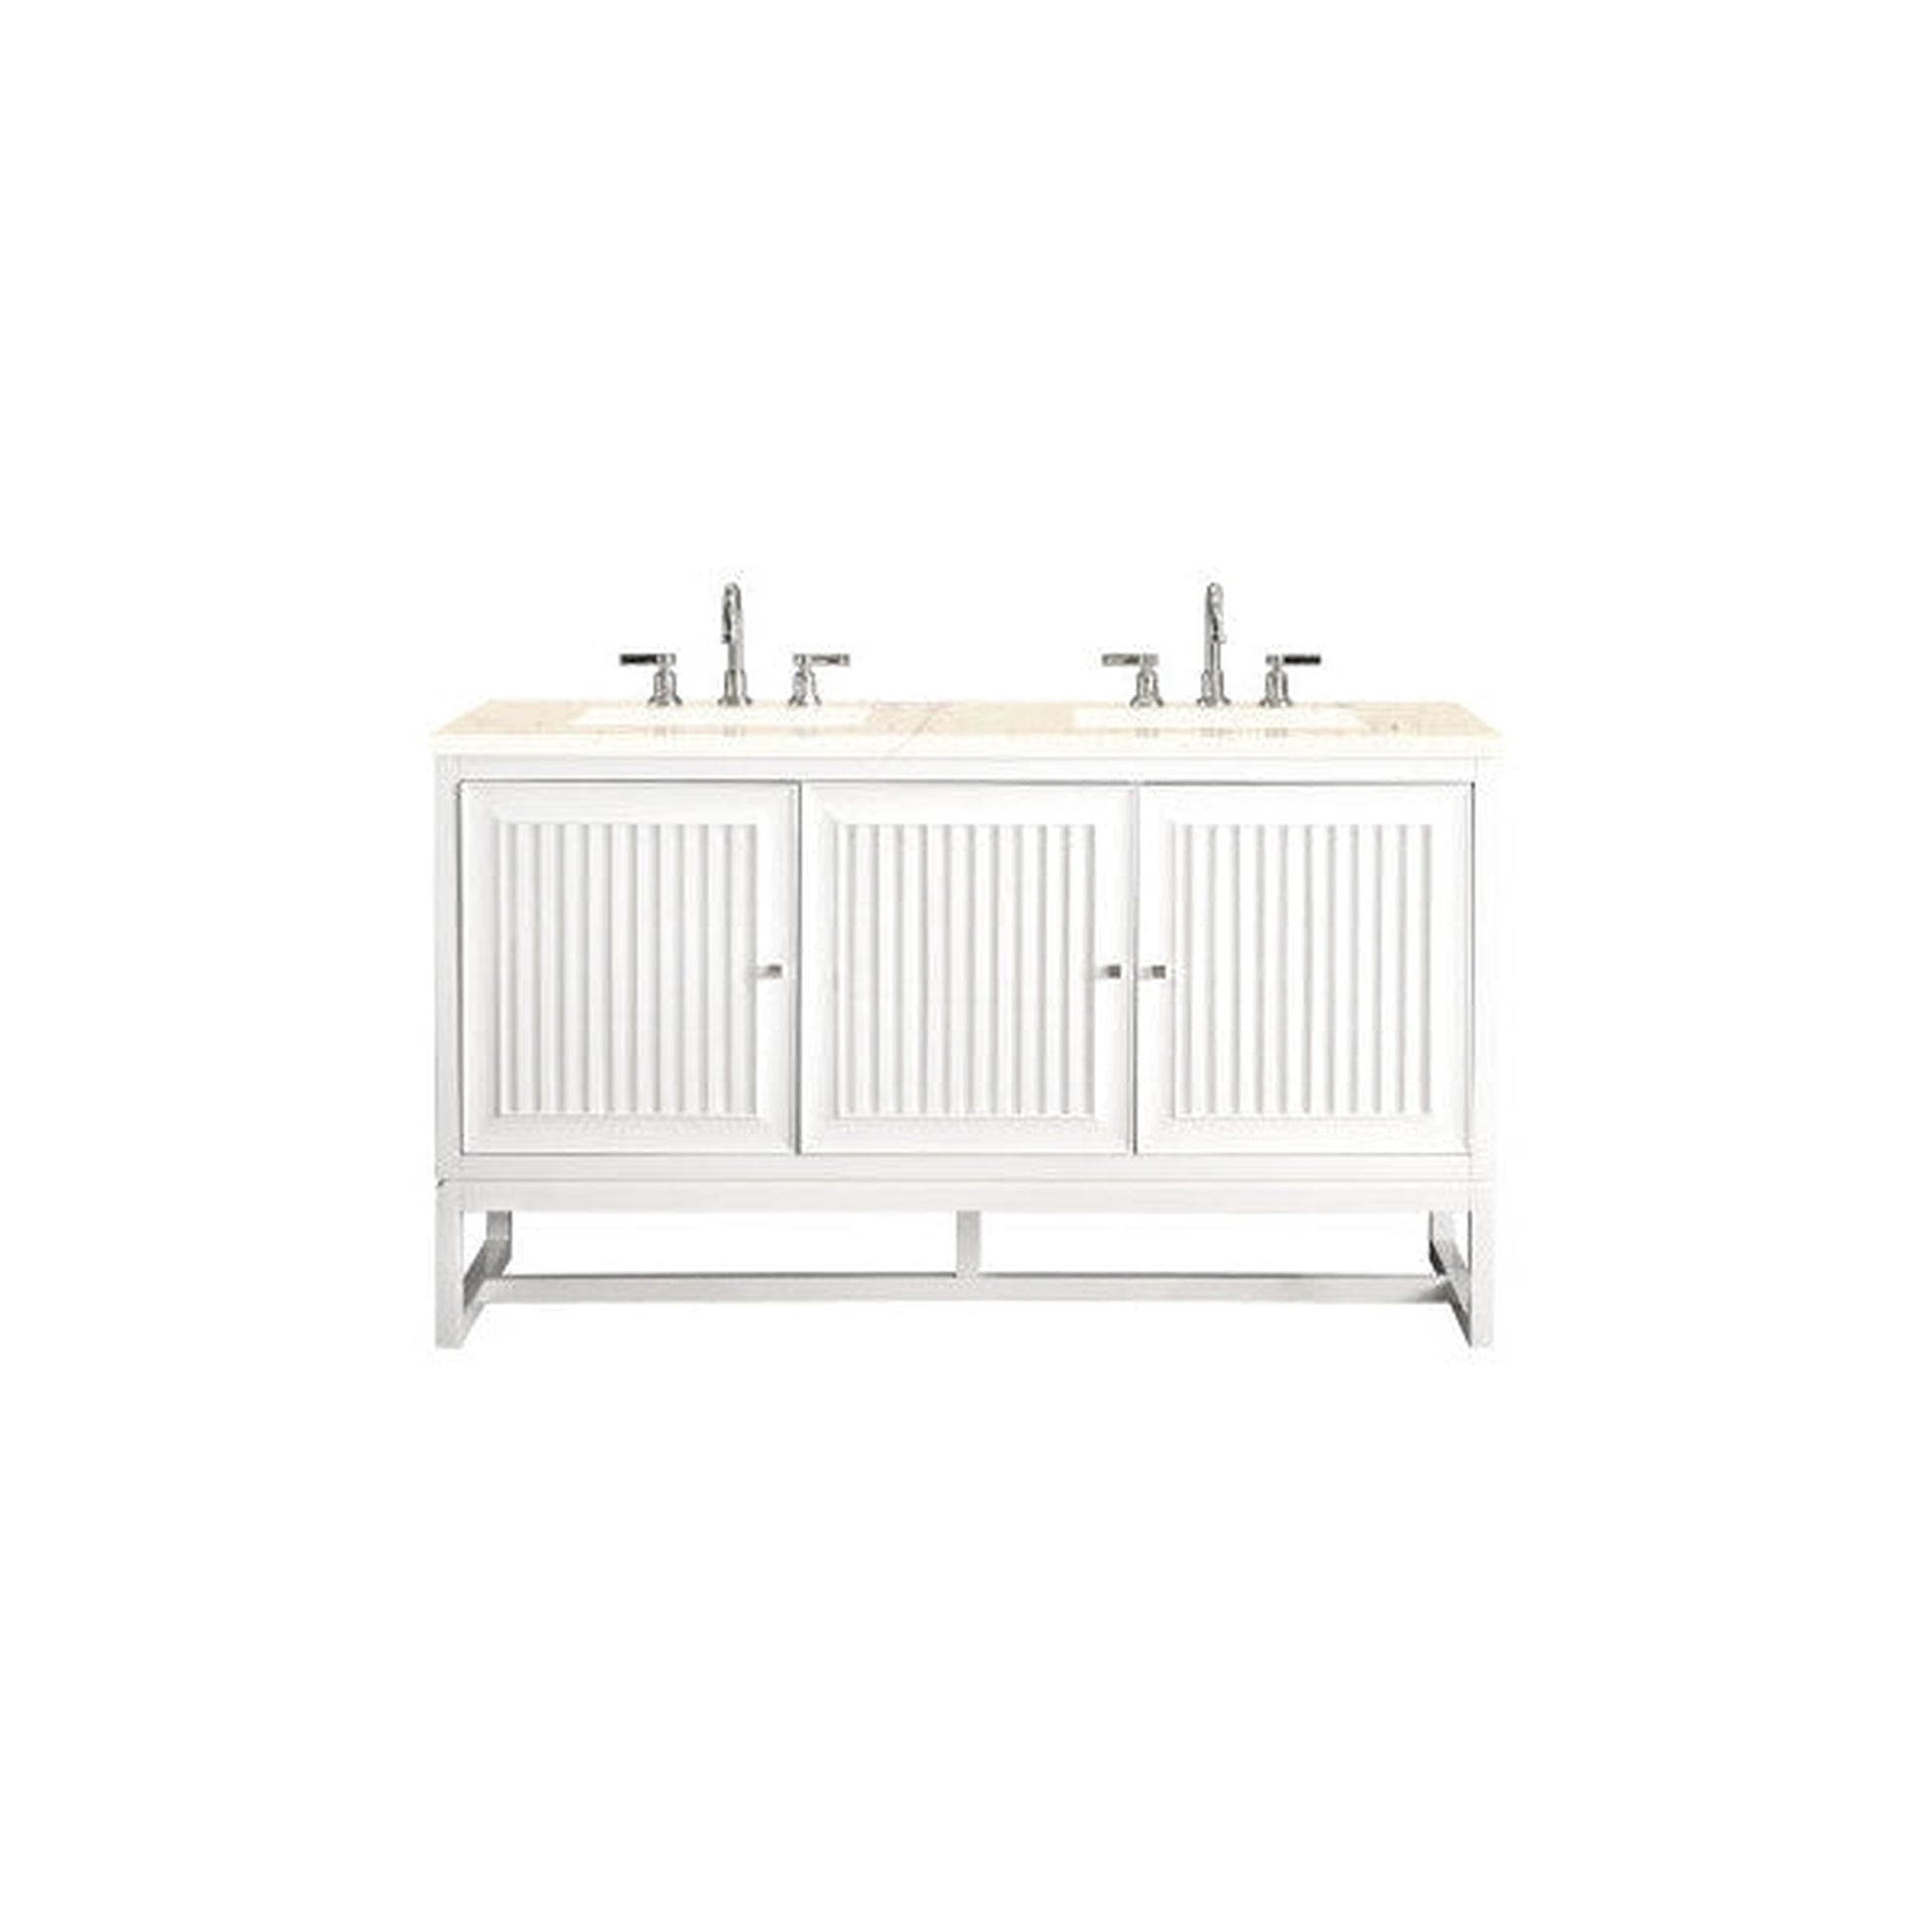 James Martin Athens 60" Double Glossy White Bathroom Vanity With 1" Eternal Marfil Quartz Top and Rectangular Ceramic Sink